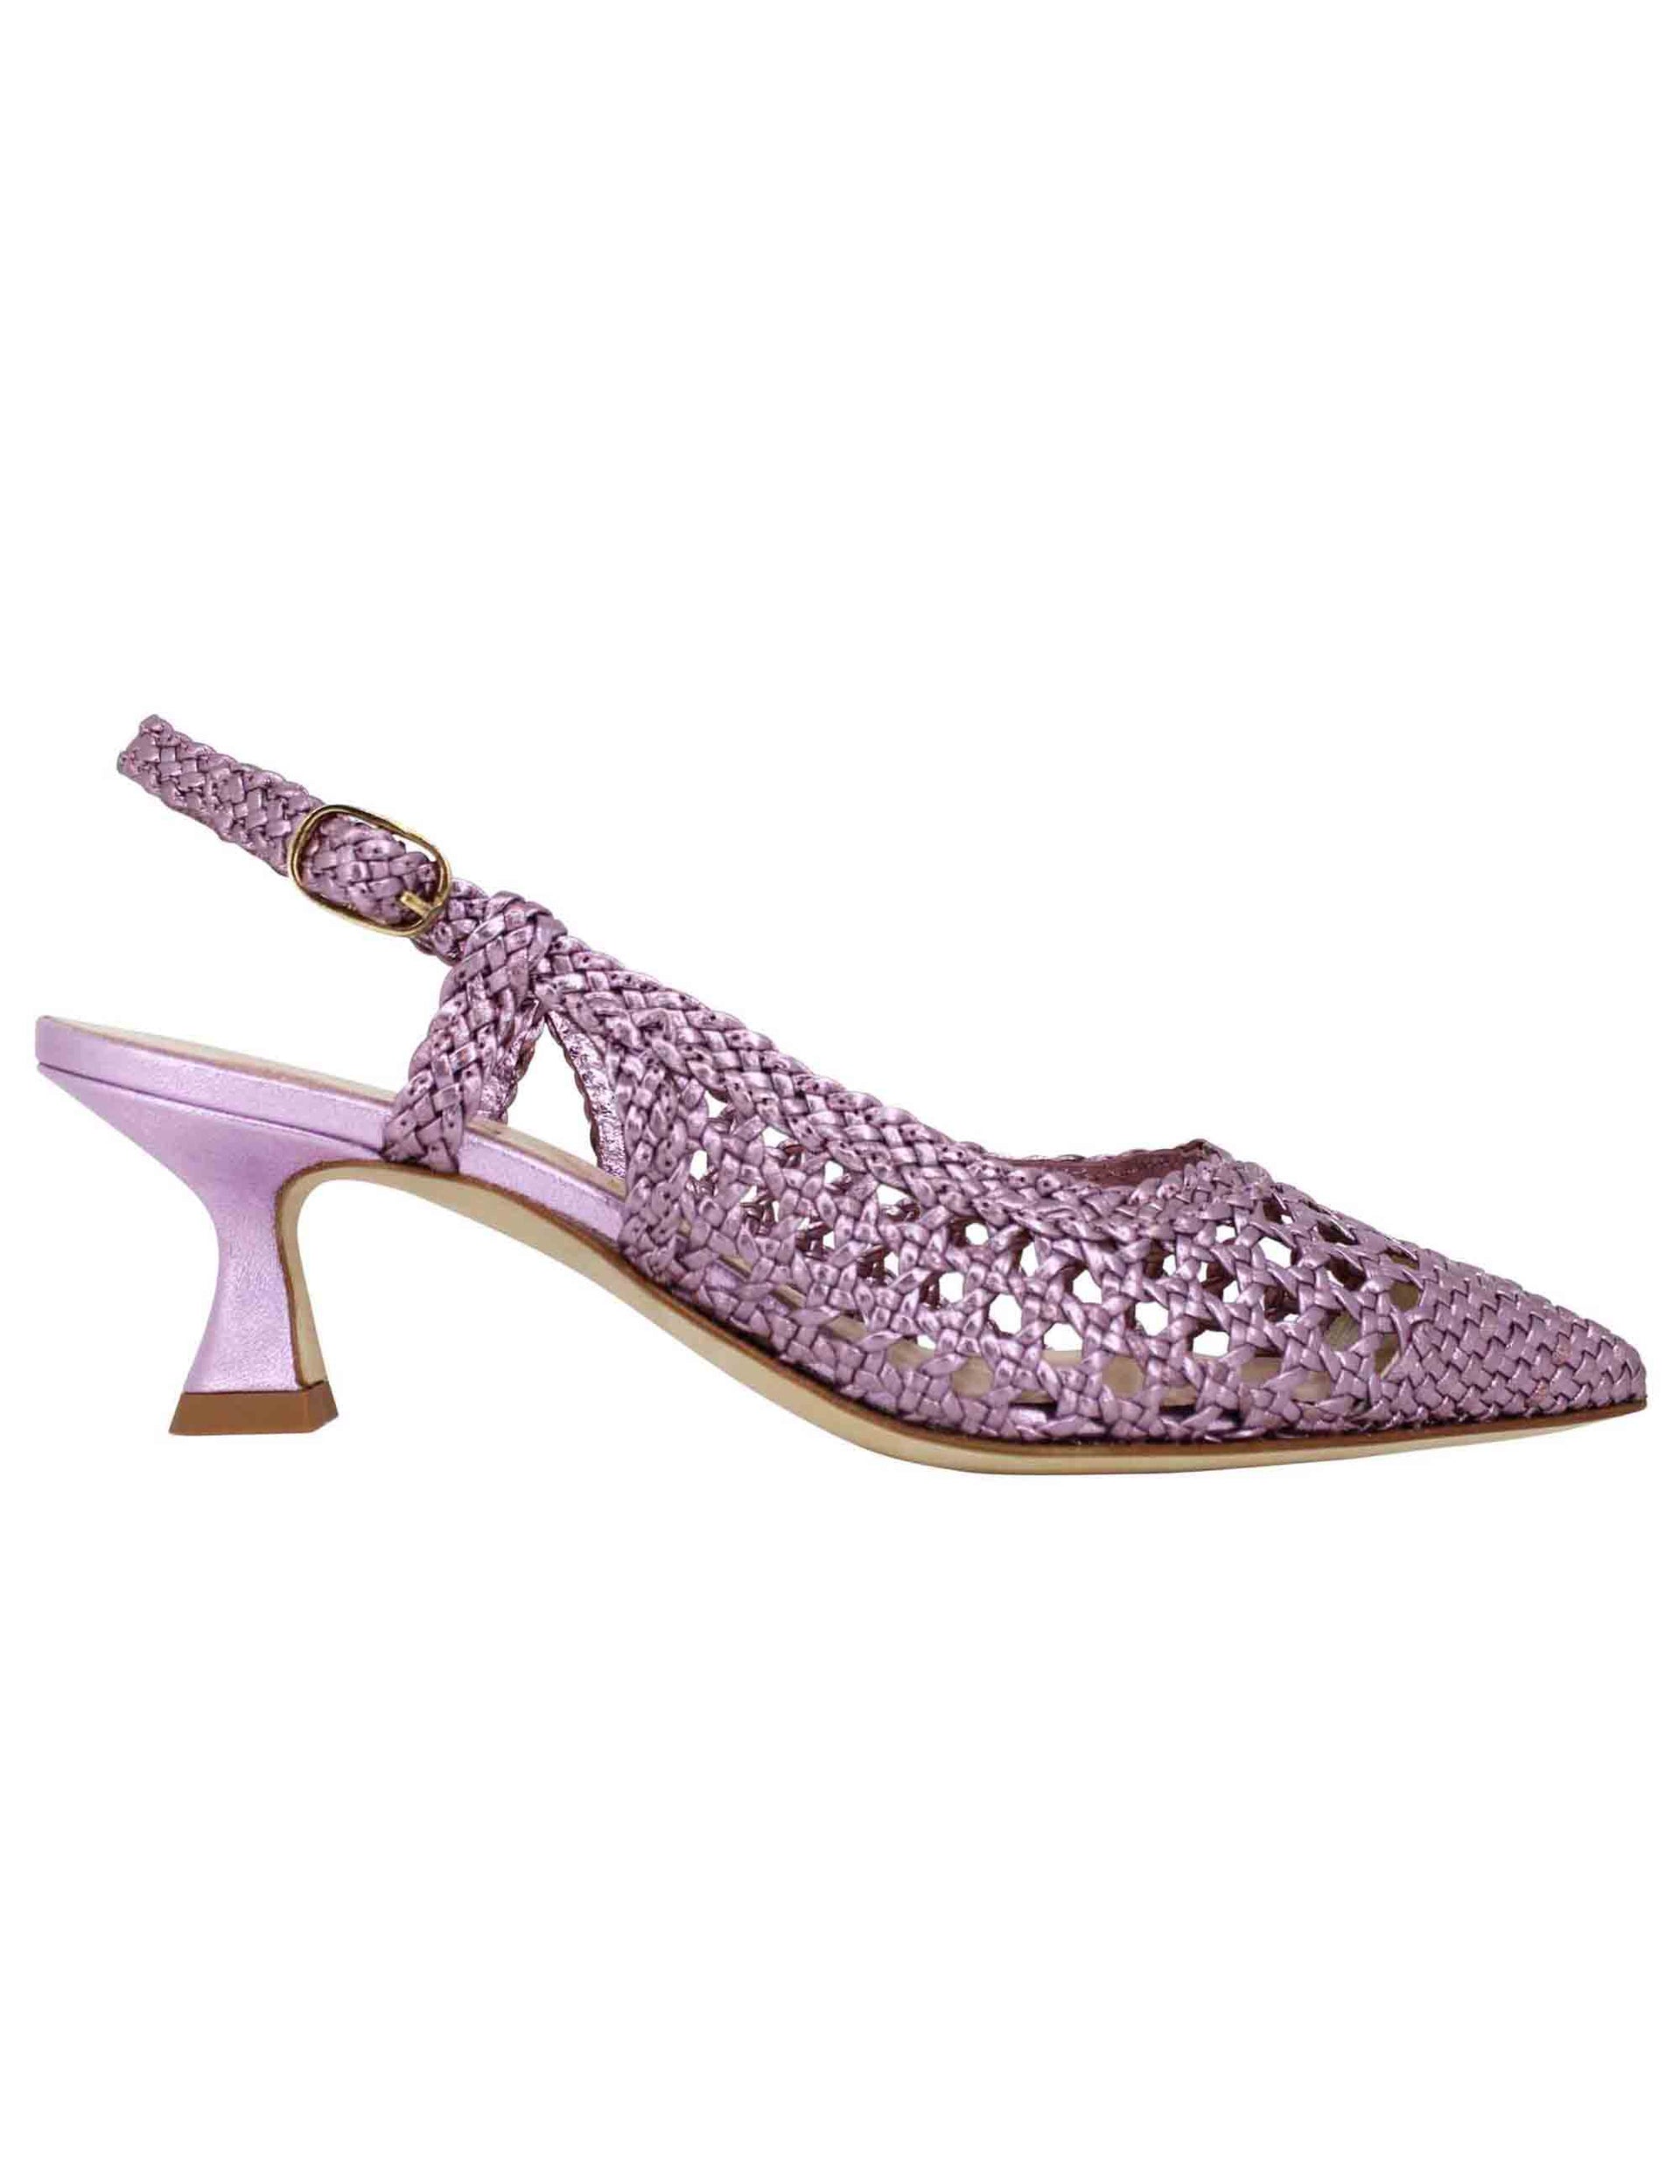 Women's slingback pumps in lilac laminated woven leather with matching heel